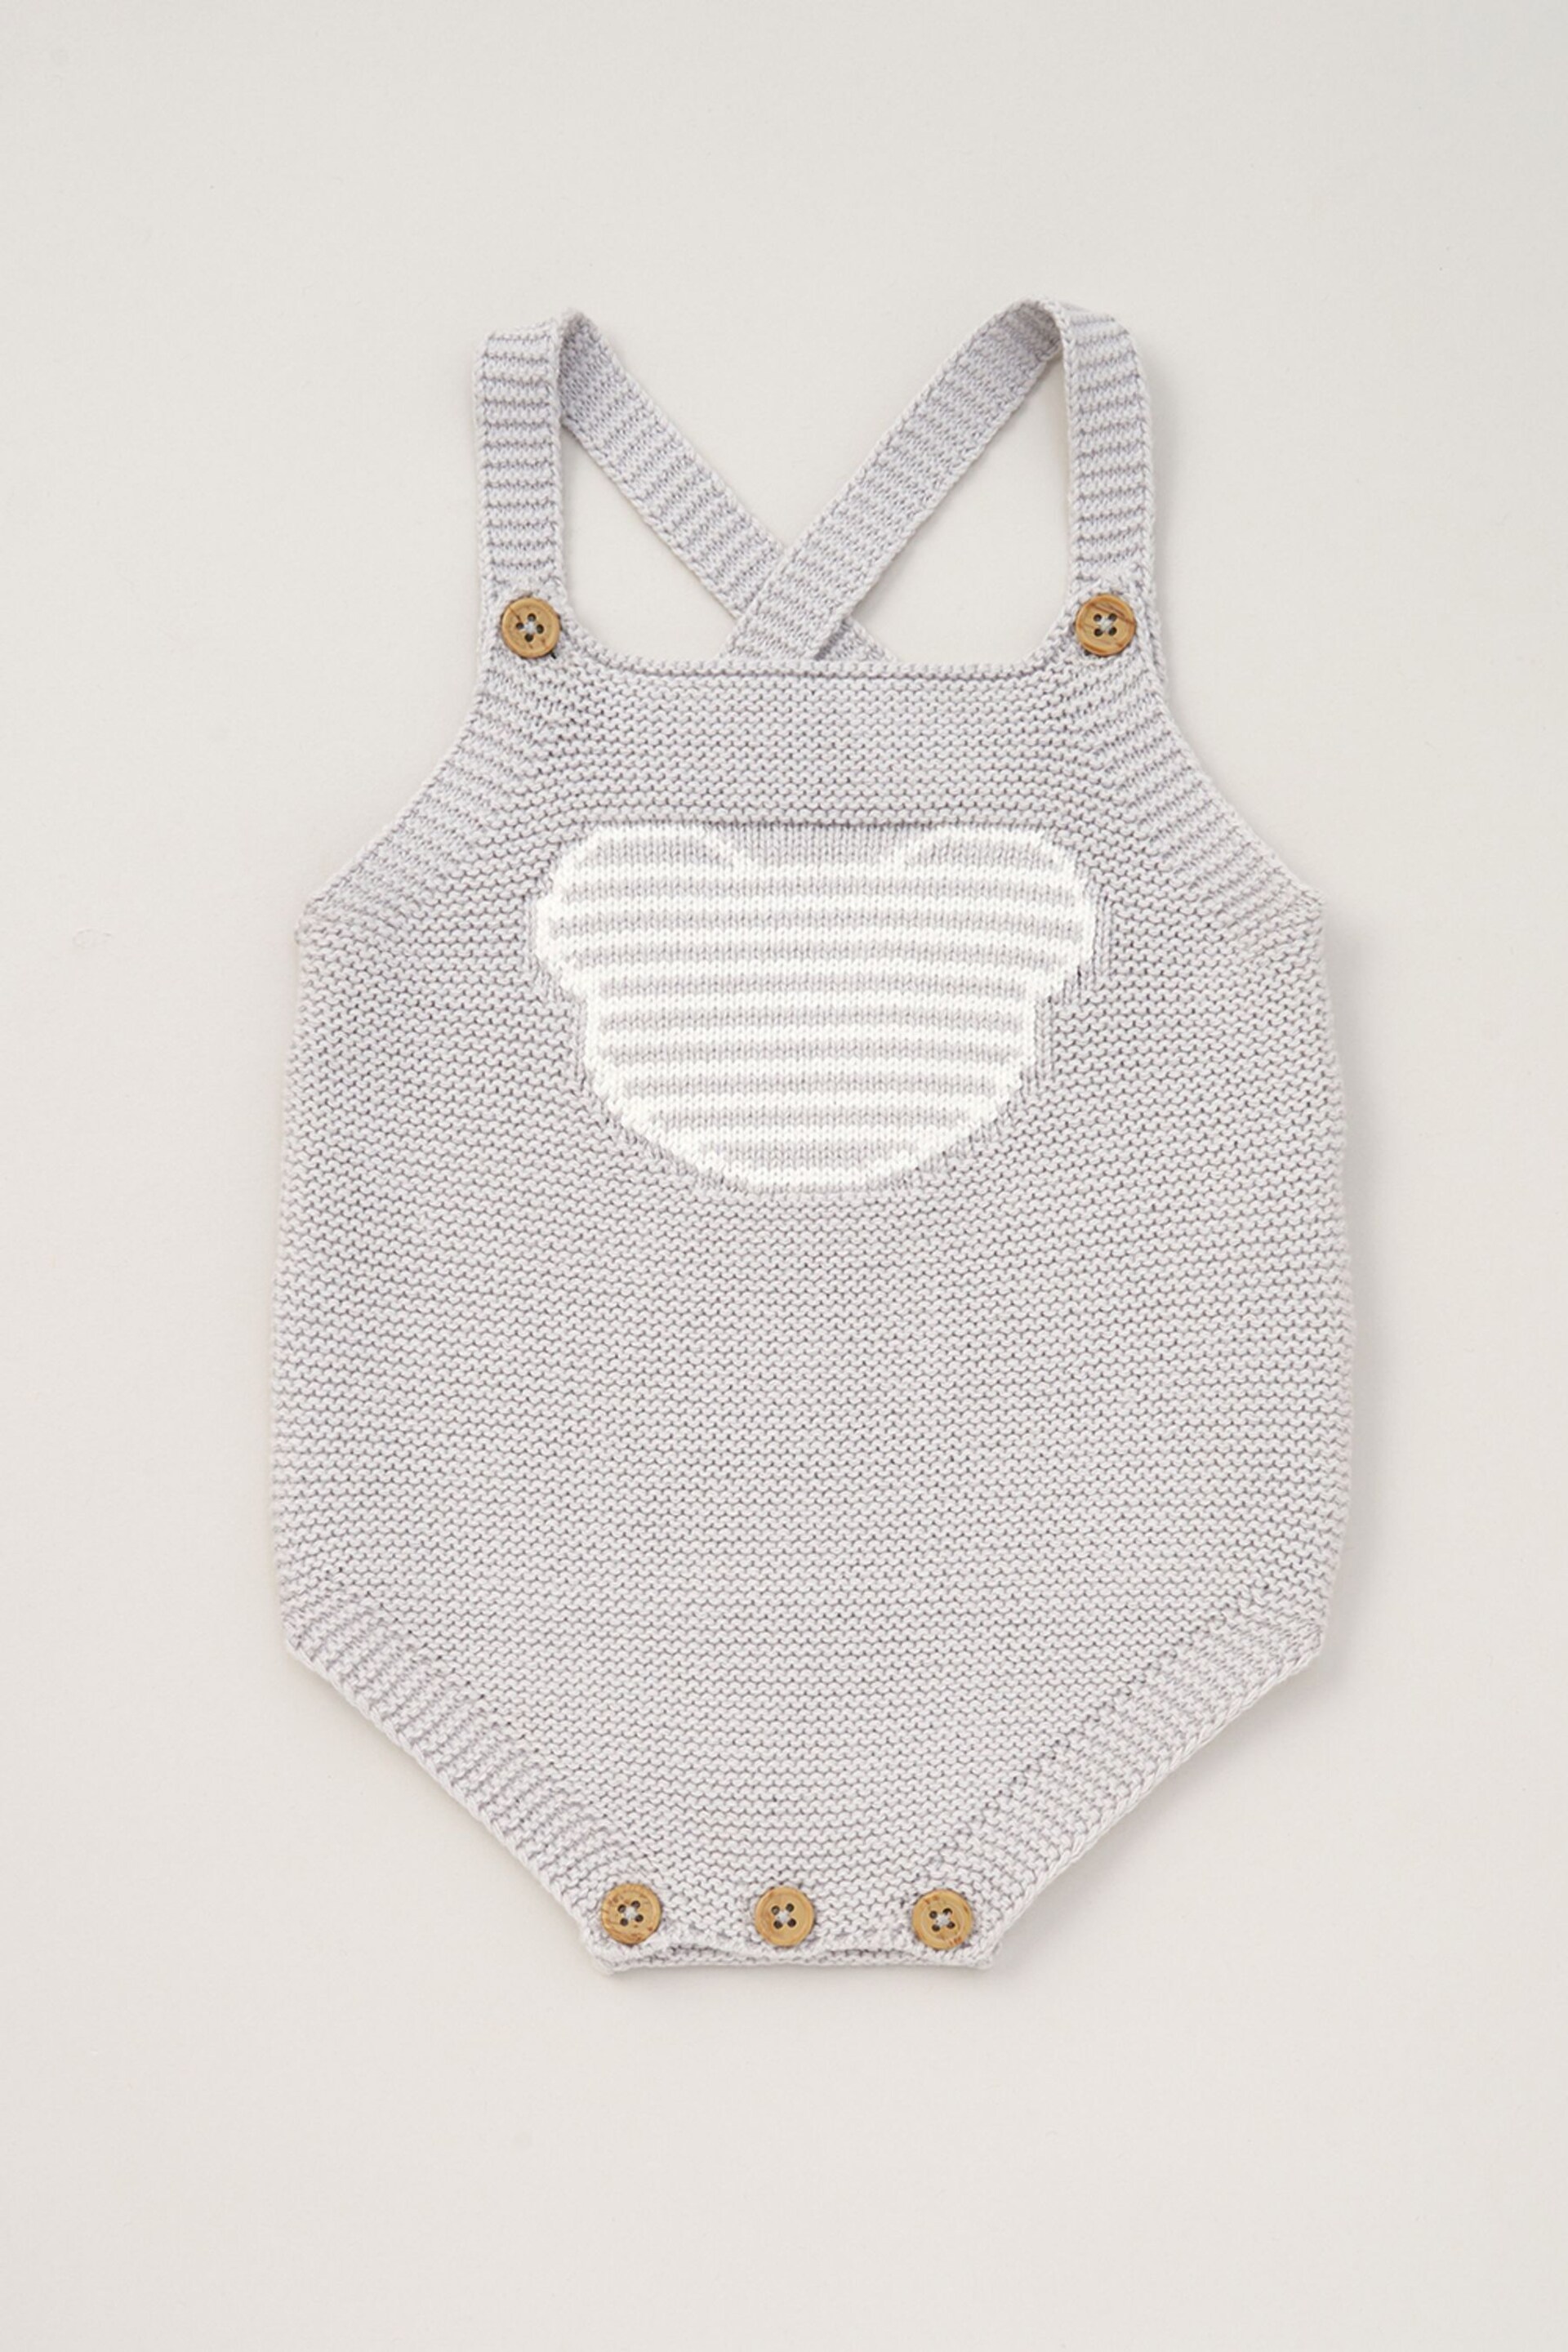 Rock-A-Bye Baby Boutique Grey Cotton Jersey T-Shirt and Knit Dungaree Set - Image 2 of 4